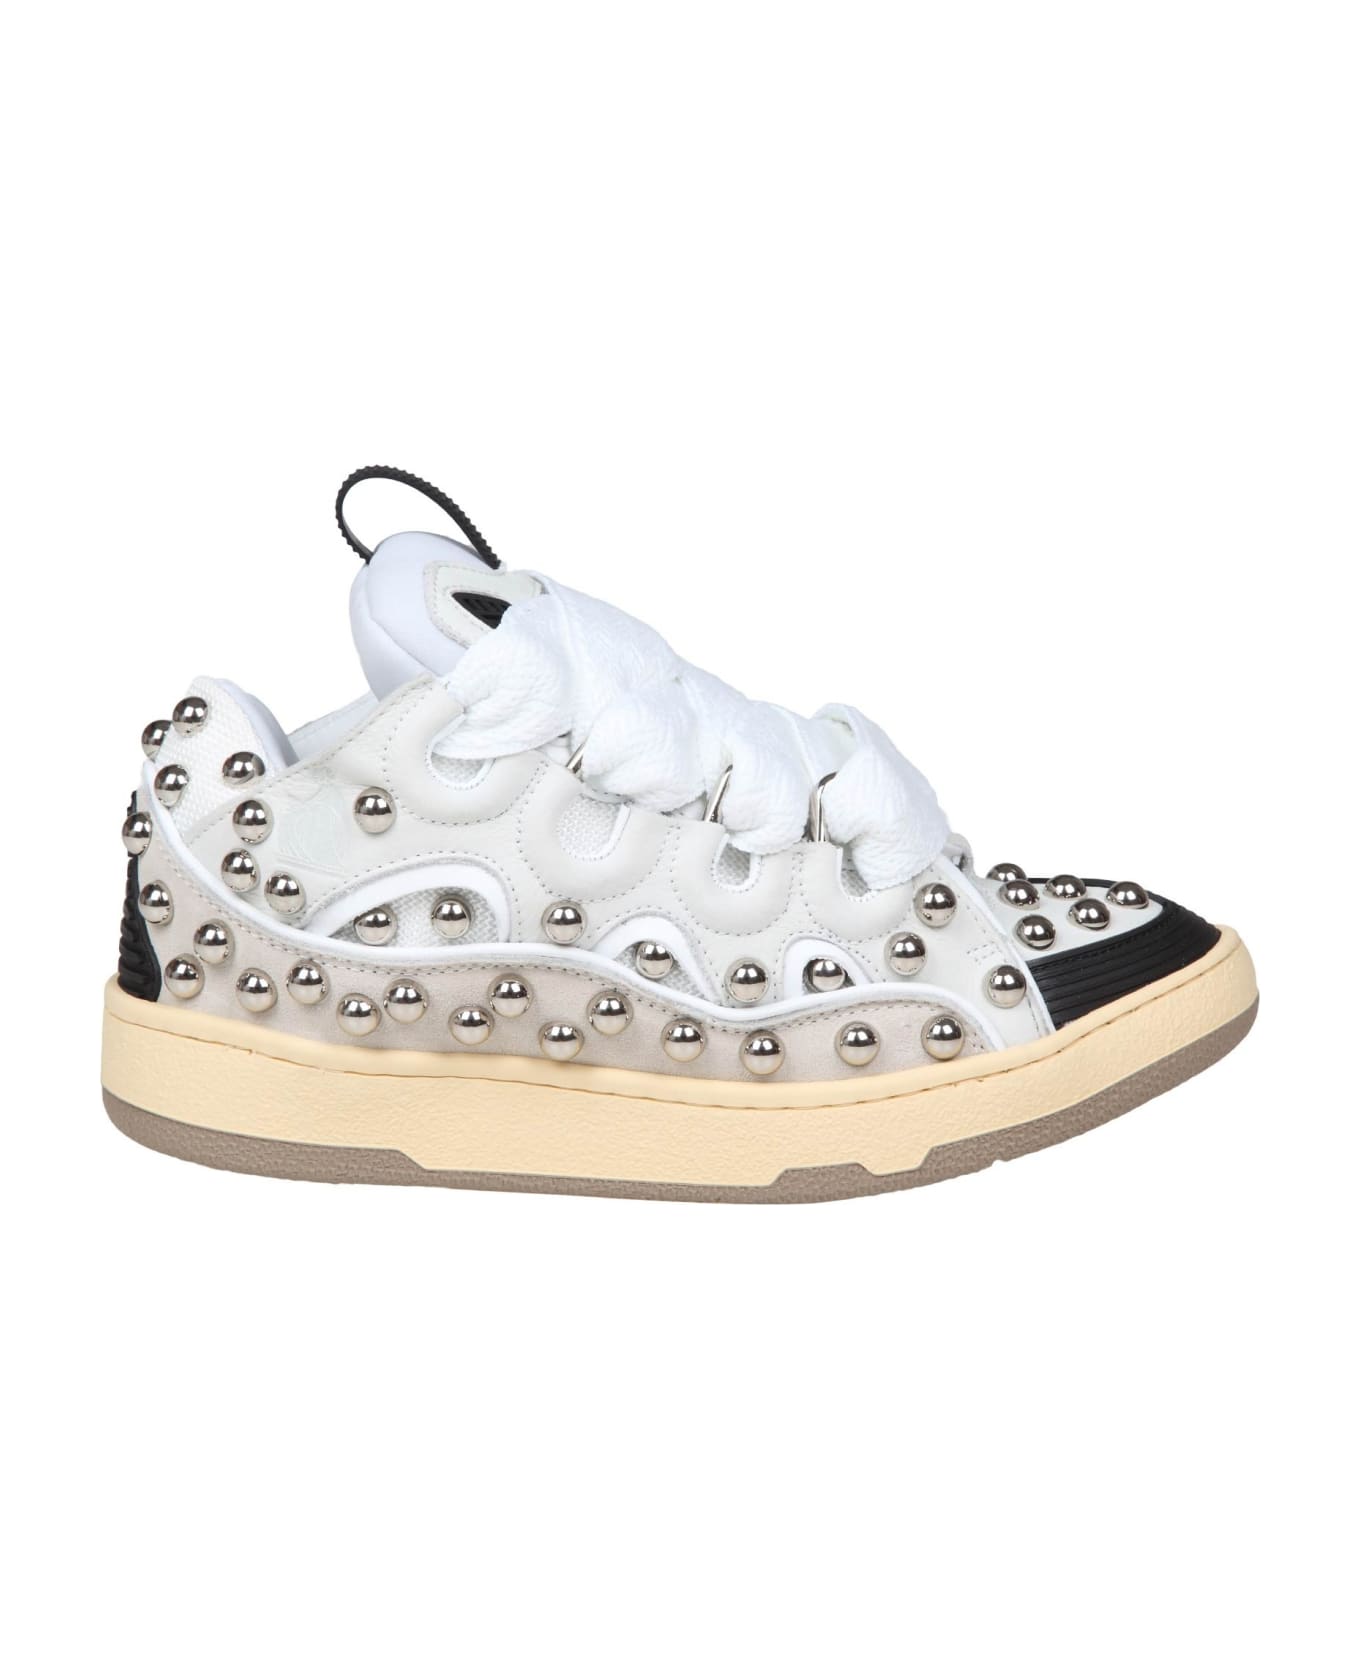 Lanvin Curb Sneakers In Black And White Leather With Applied Studs - White